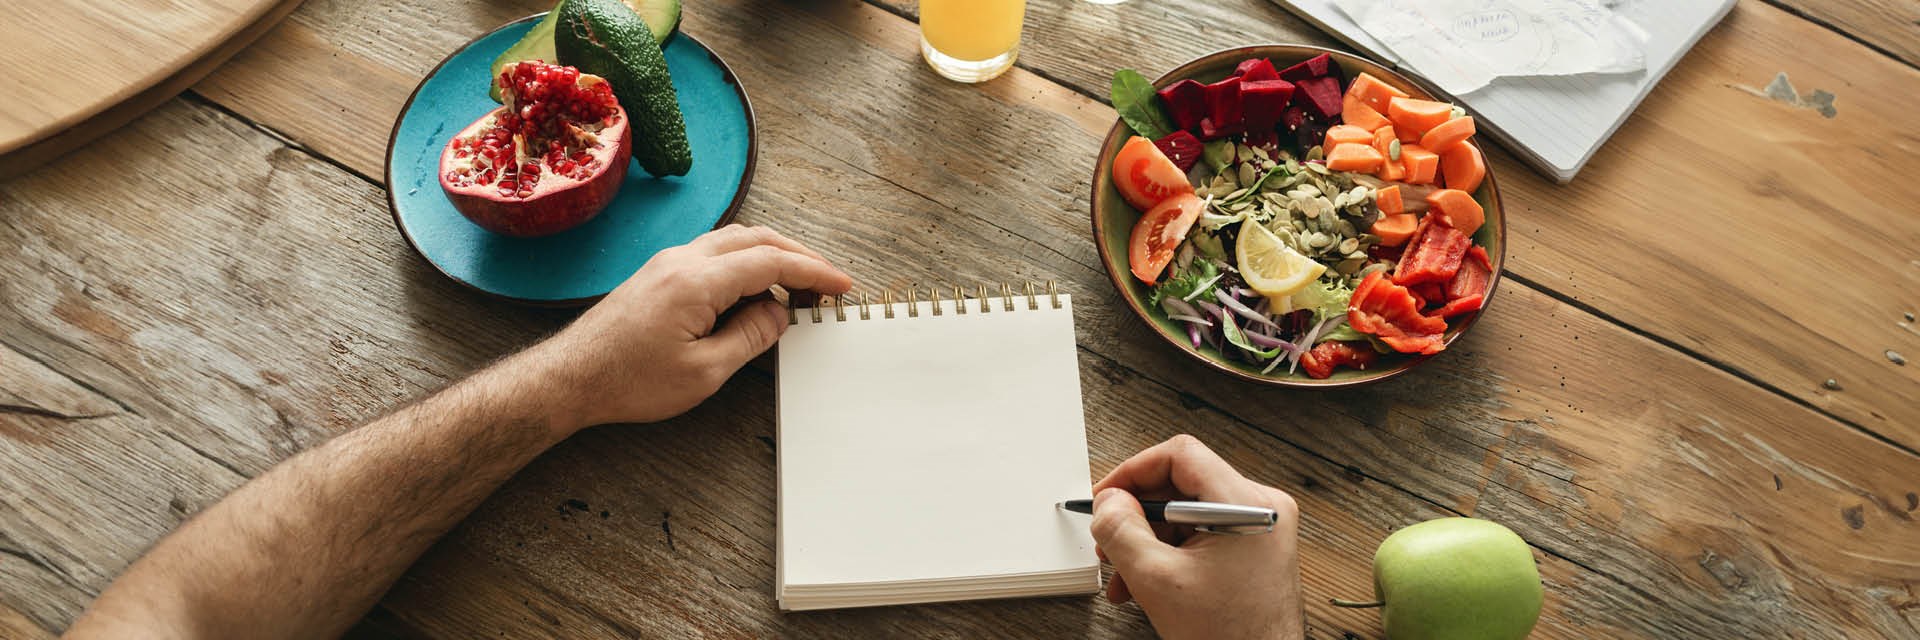 Man writing on a notepad with healthy foods around him